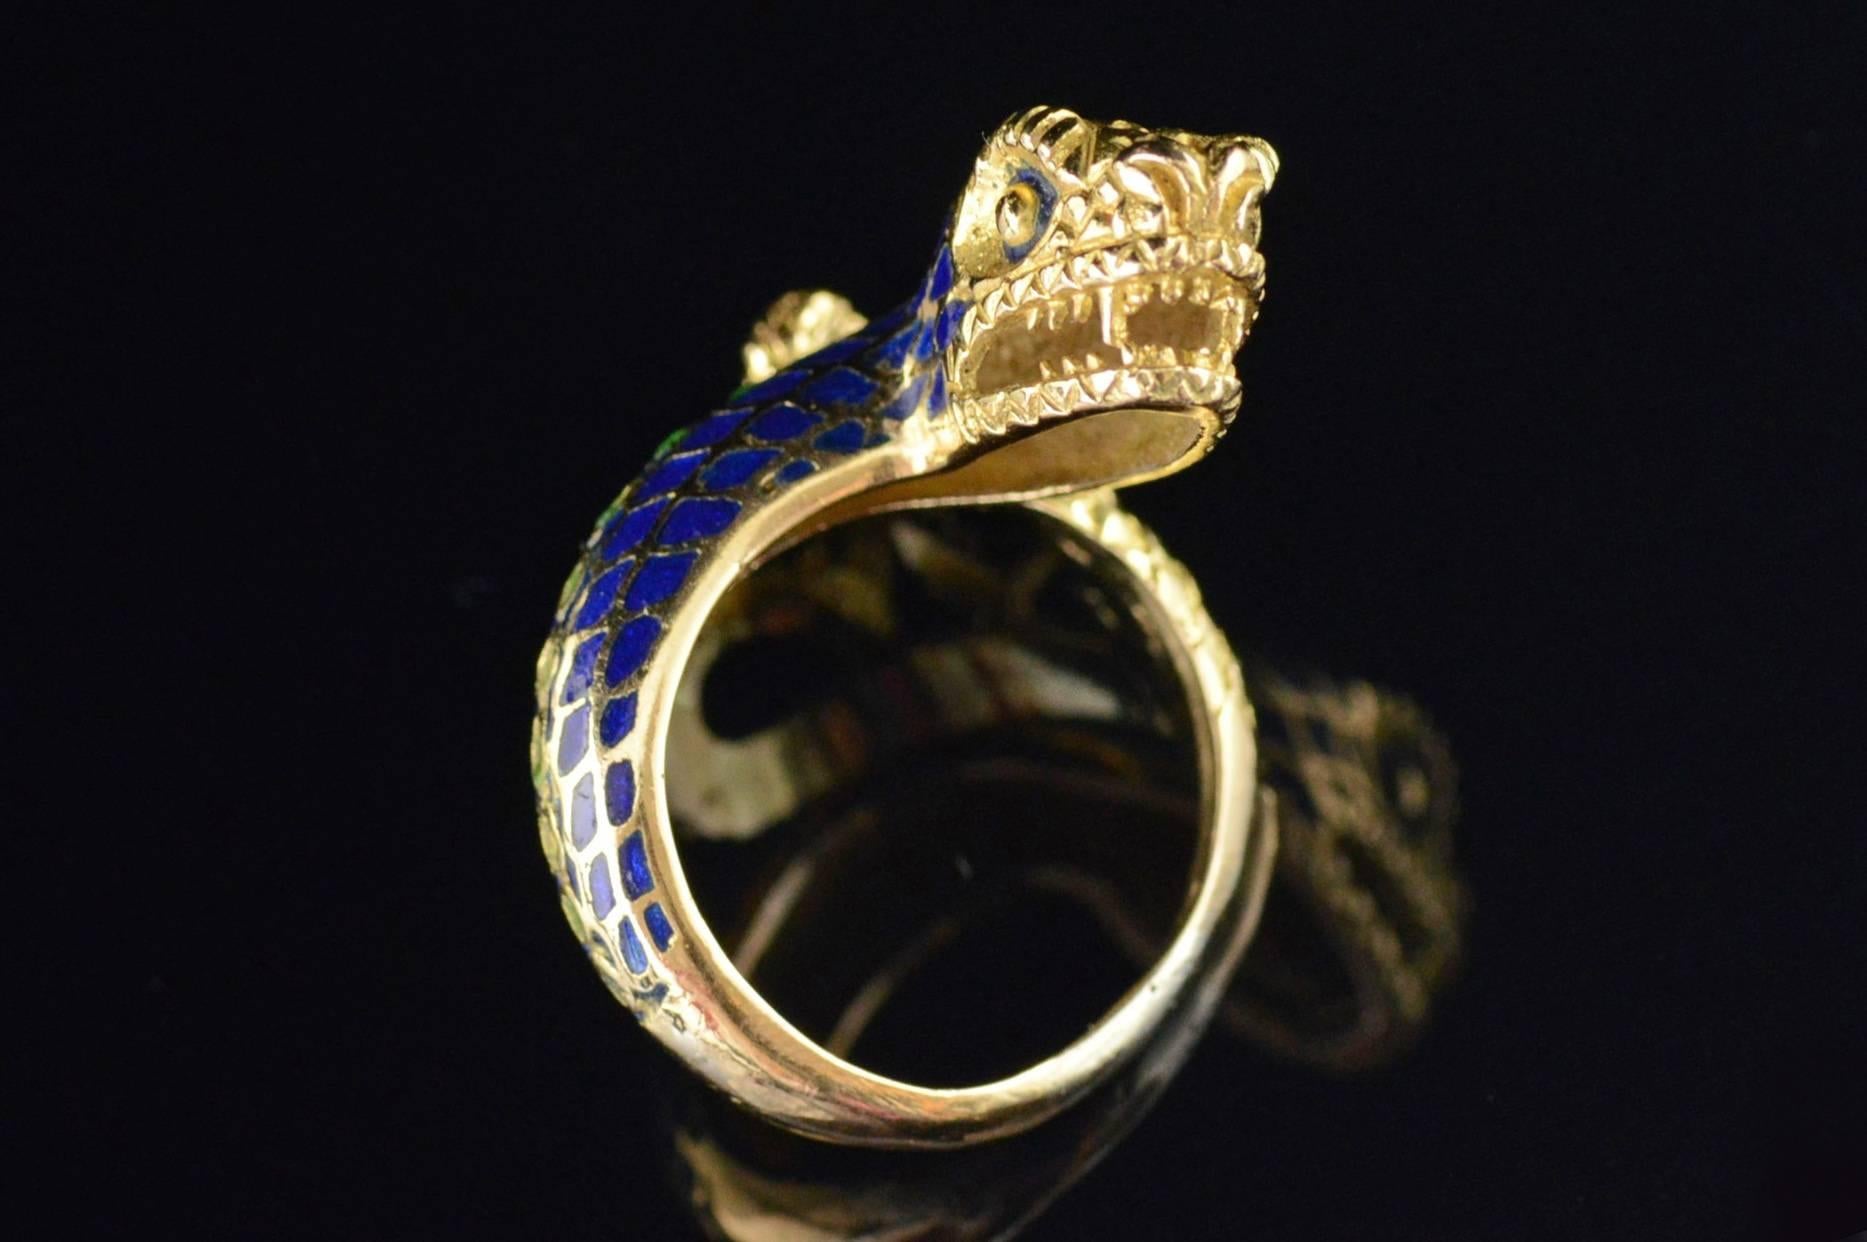 ·Item: 18K Detailed Green Blue Enamel Snake Head Wrapped Ring Size 6 Yellow Gold

·Era: Vintage / 1960s

·Composition: 18k Gold Marked / Tested

·Weight: 8.6g